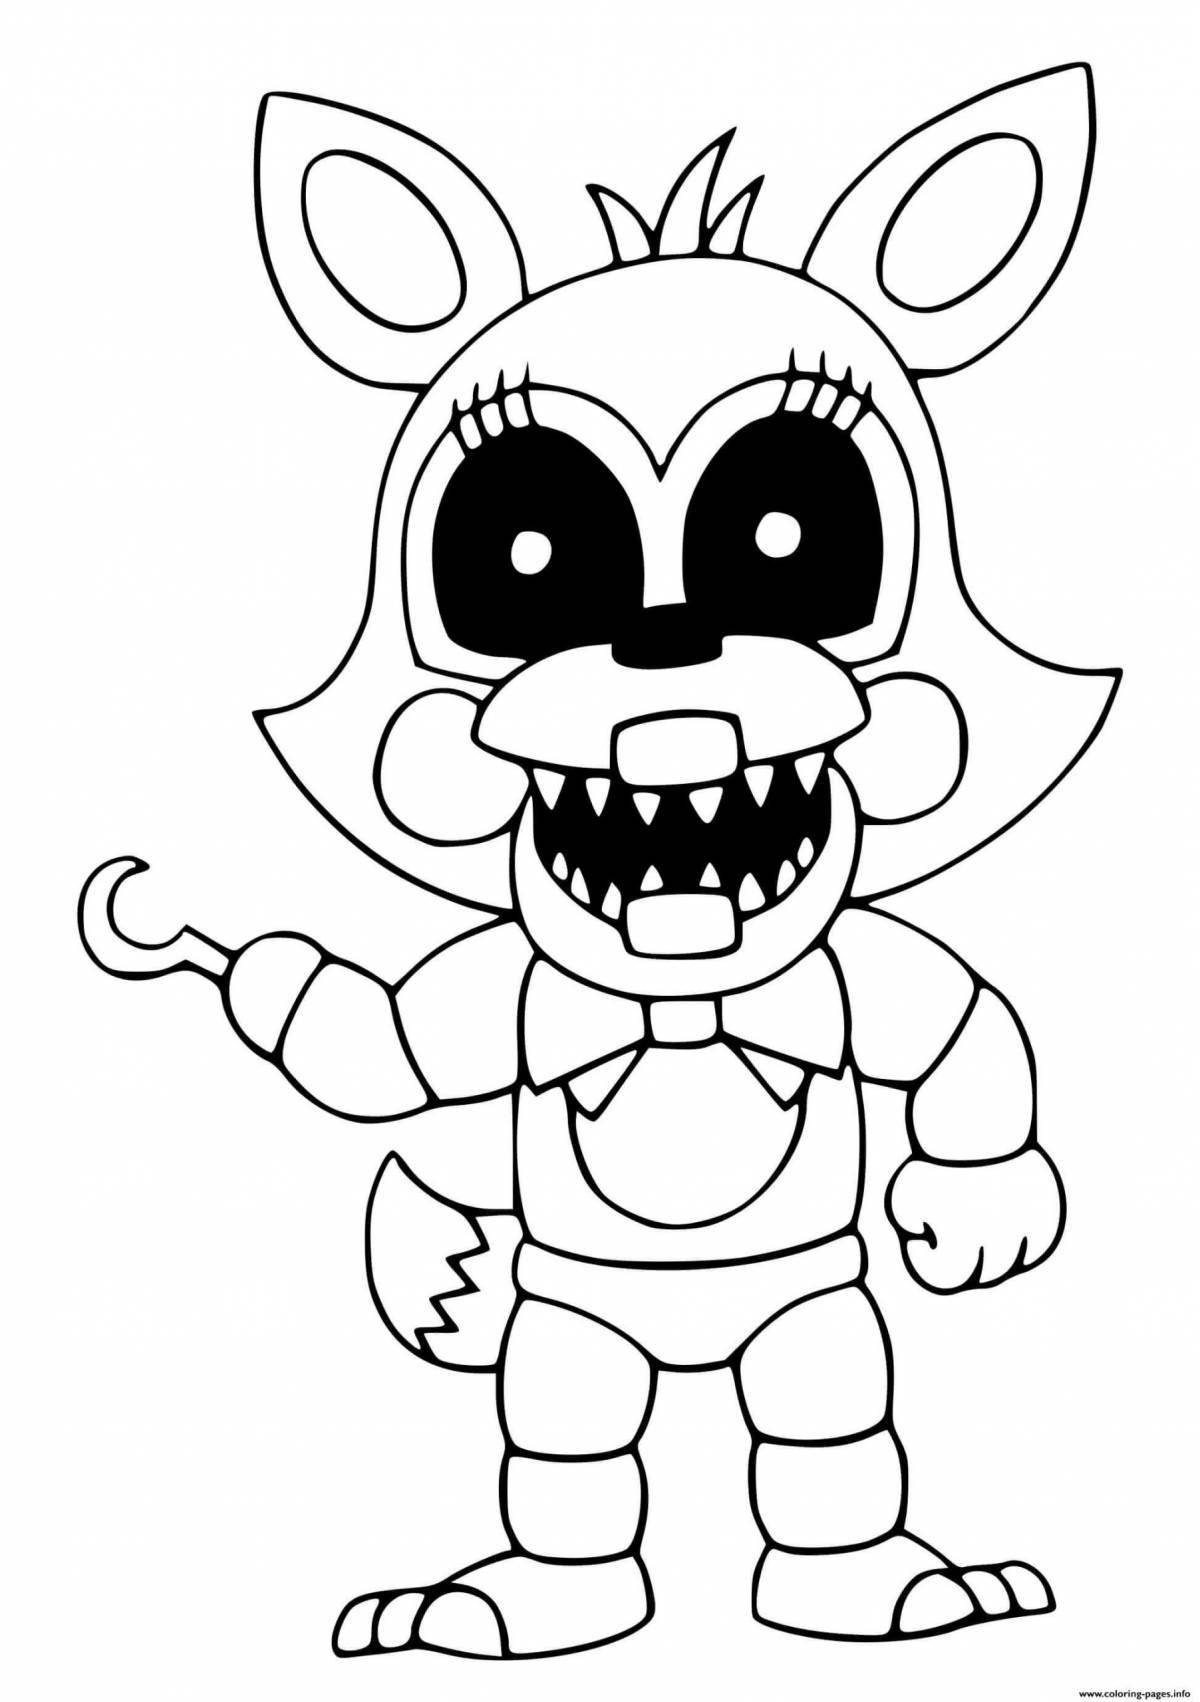 Majestic fnaf world coloring page